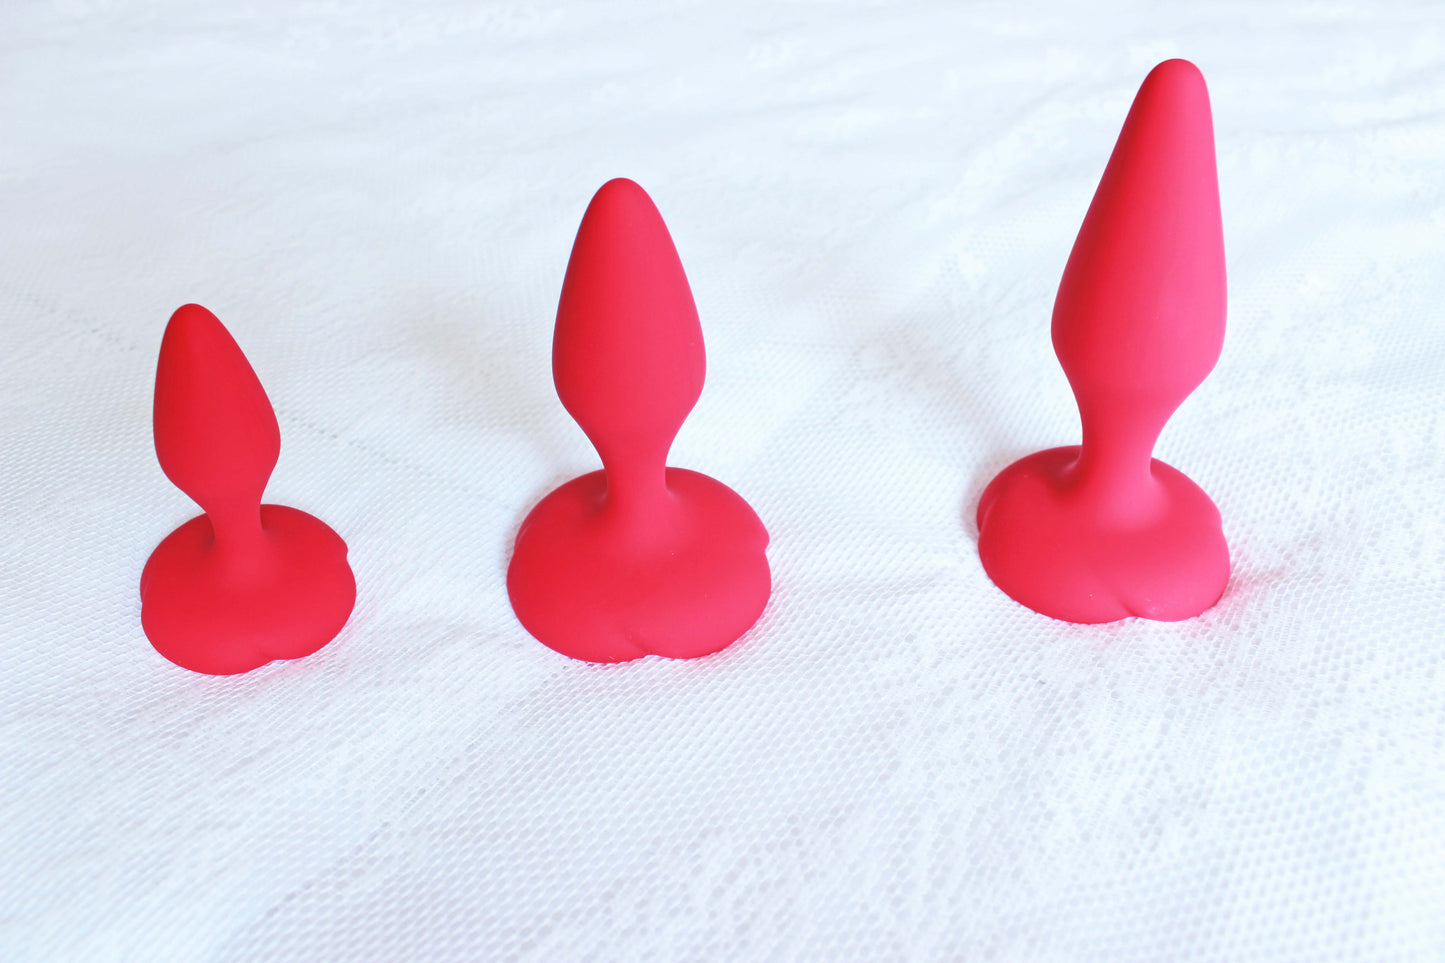 3 red rose silicone anal training butt plugs standing flat on their bases on a white lace blanket